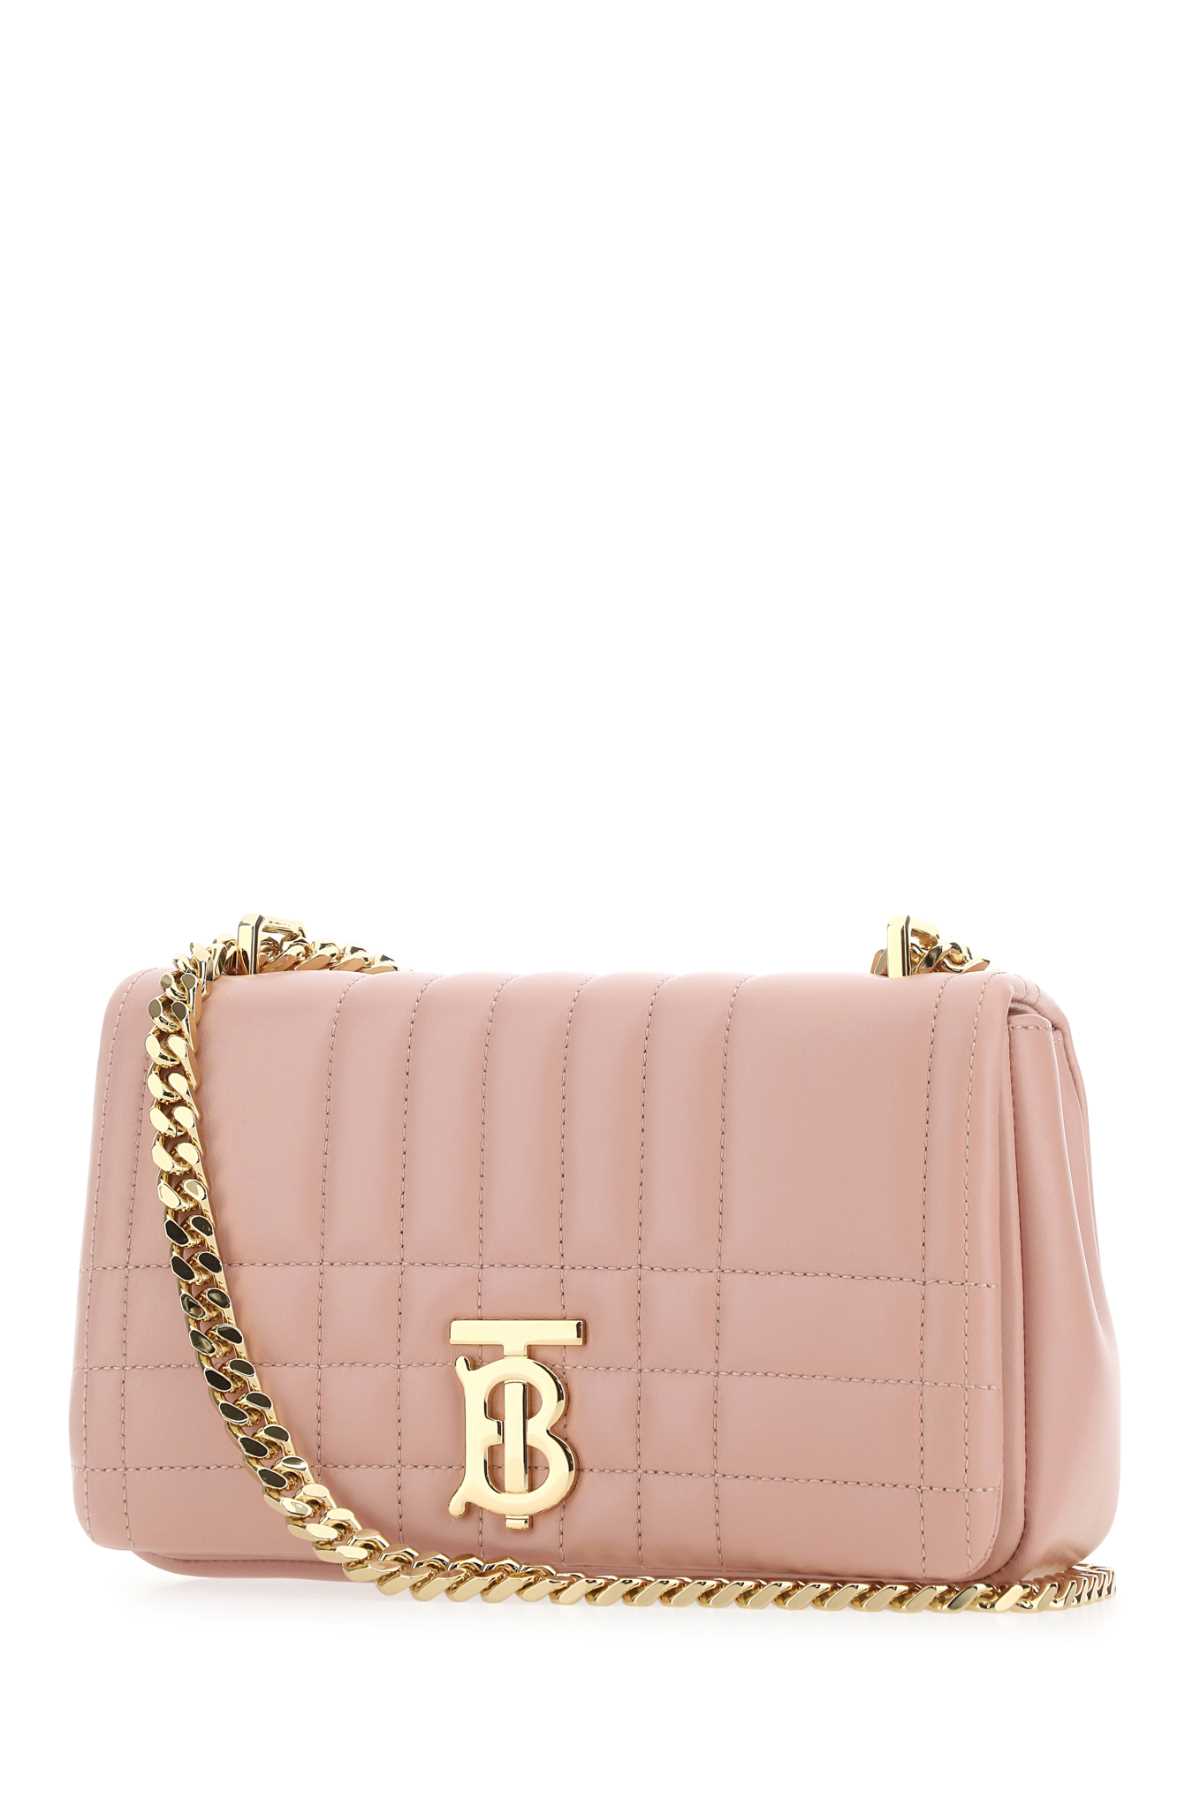 Shop Burberry Pink Nappa Leather Small Lola Shoulder Bag In A3661